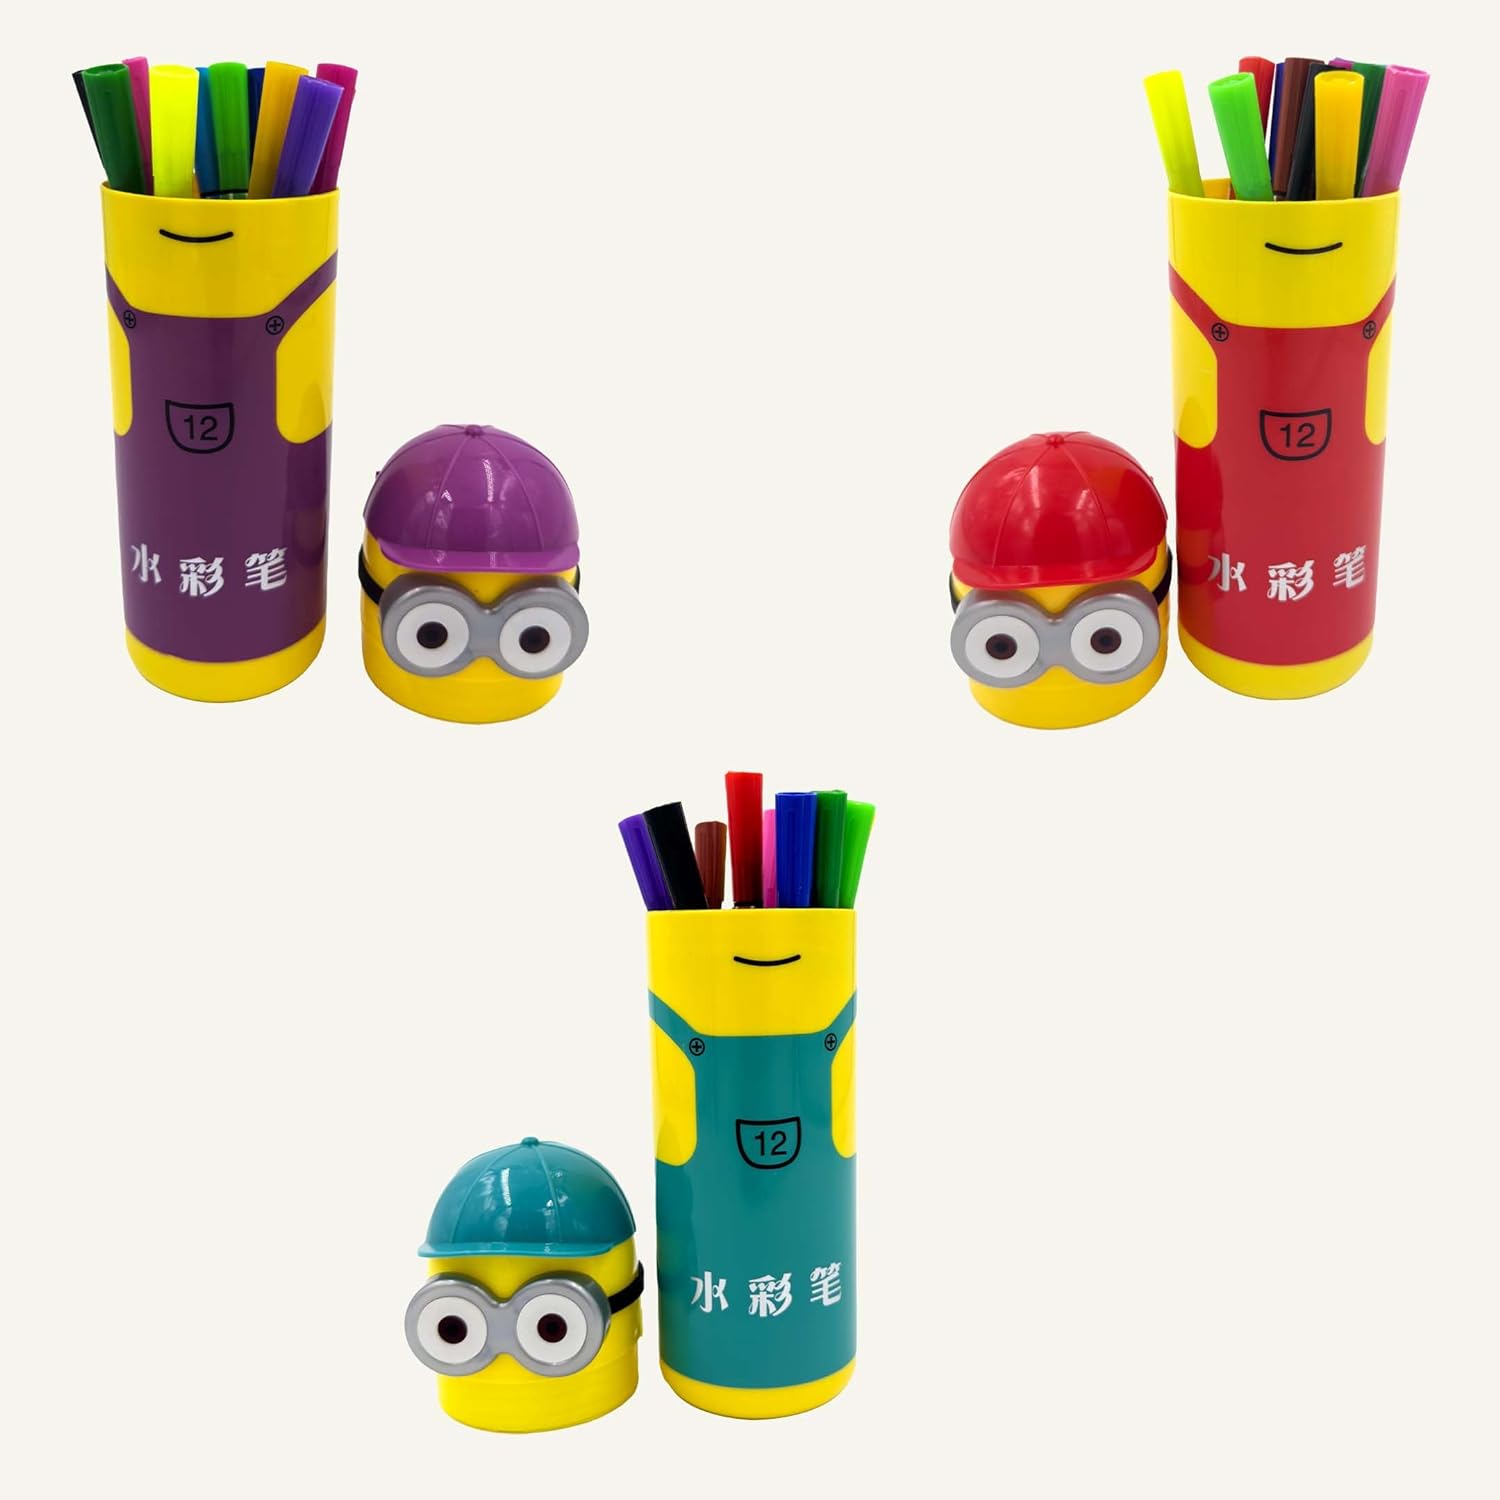 Prezzie Villa Pack of 12 Designer Bullet Pencils Assorted Colours Birthday Gift  Return Gifts for Kids (Minion) : Amazon.in: Home & Kitchen